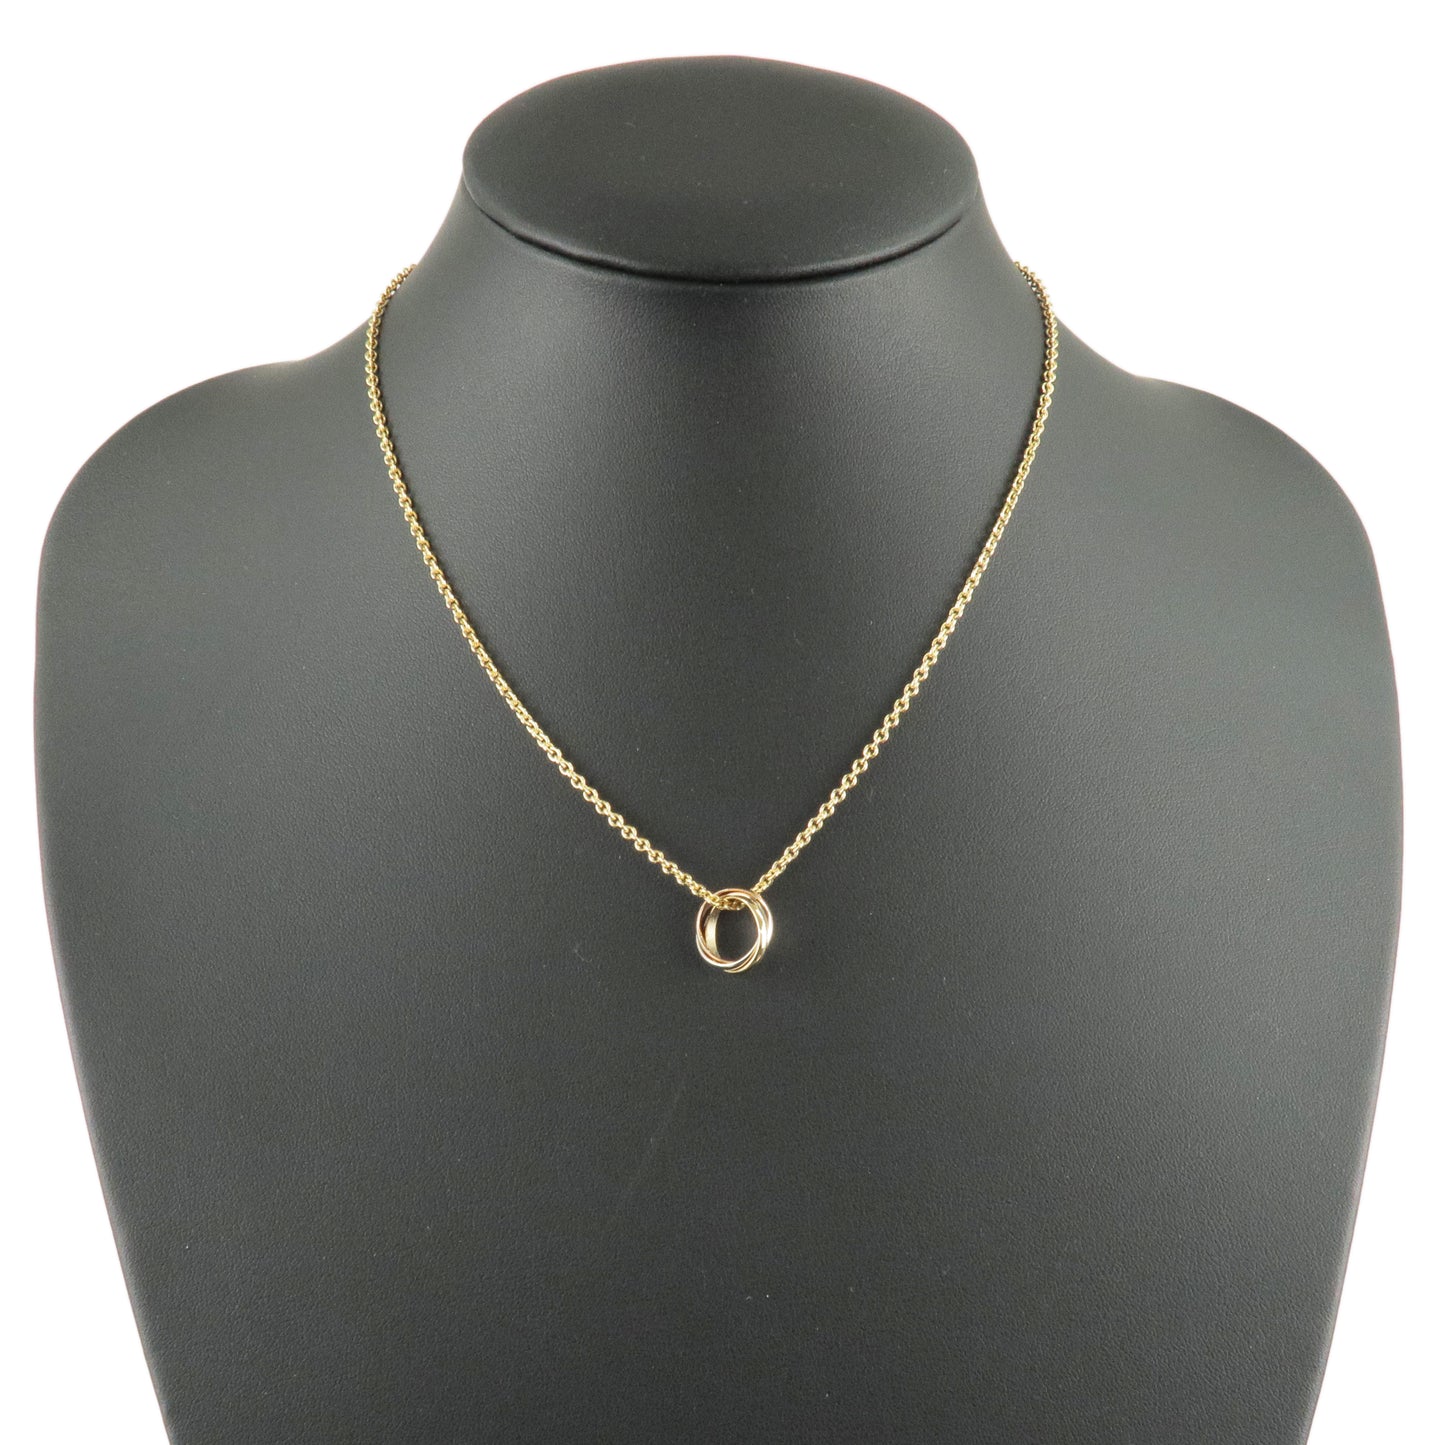 Cartier Trinity Necklace K18 750 Yellow/White/Rose Gold